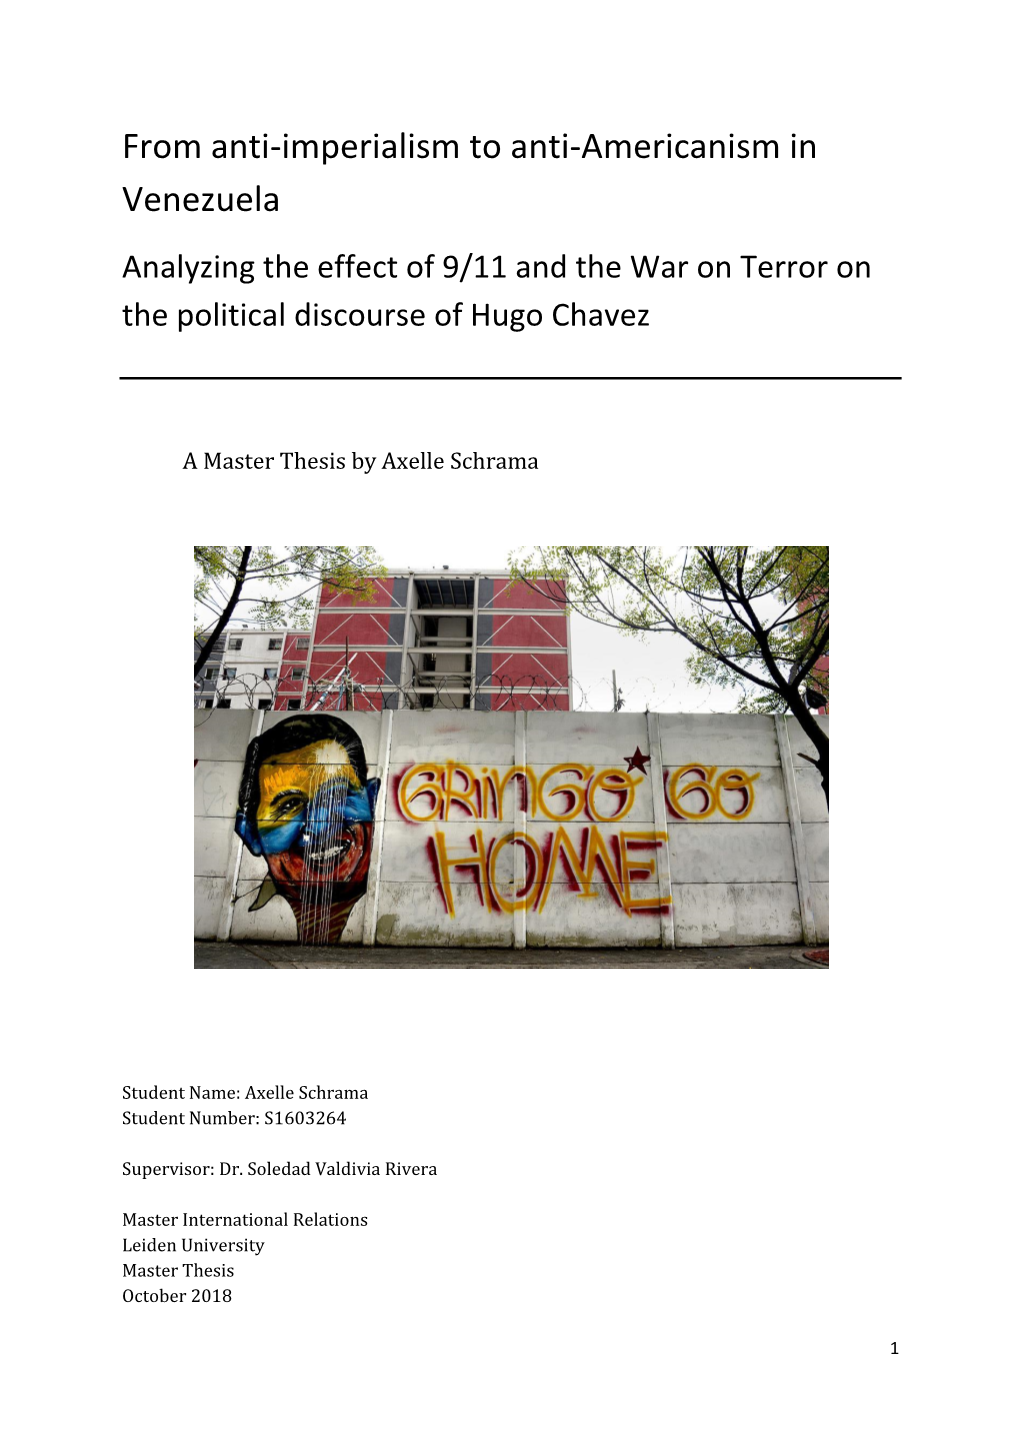 From Anti-Imperialism to Anti-Americanism in Venezuela Analyzing the Effect of 9/11 and the War on Terror on the Political Discourse of Hugo Chavez